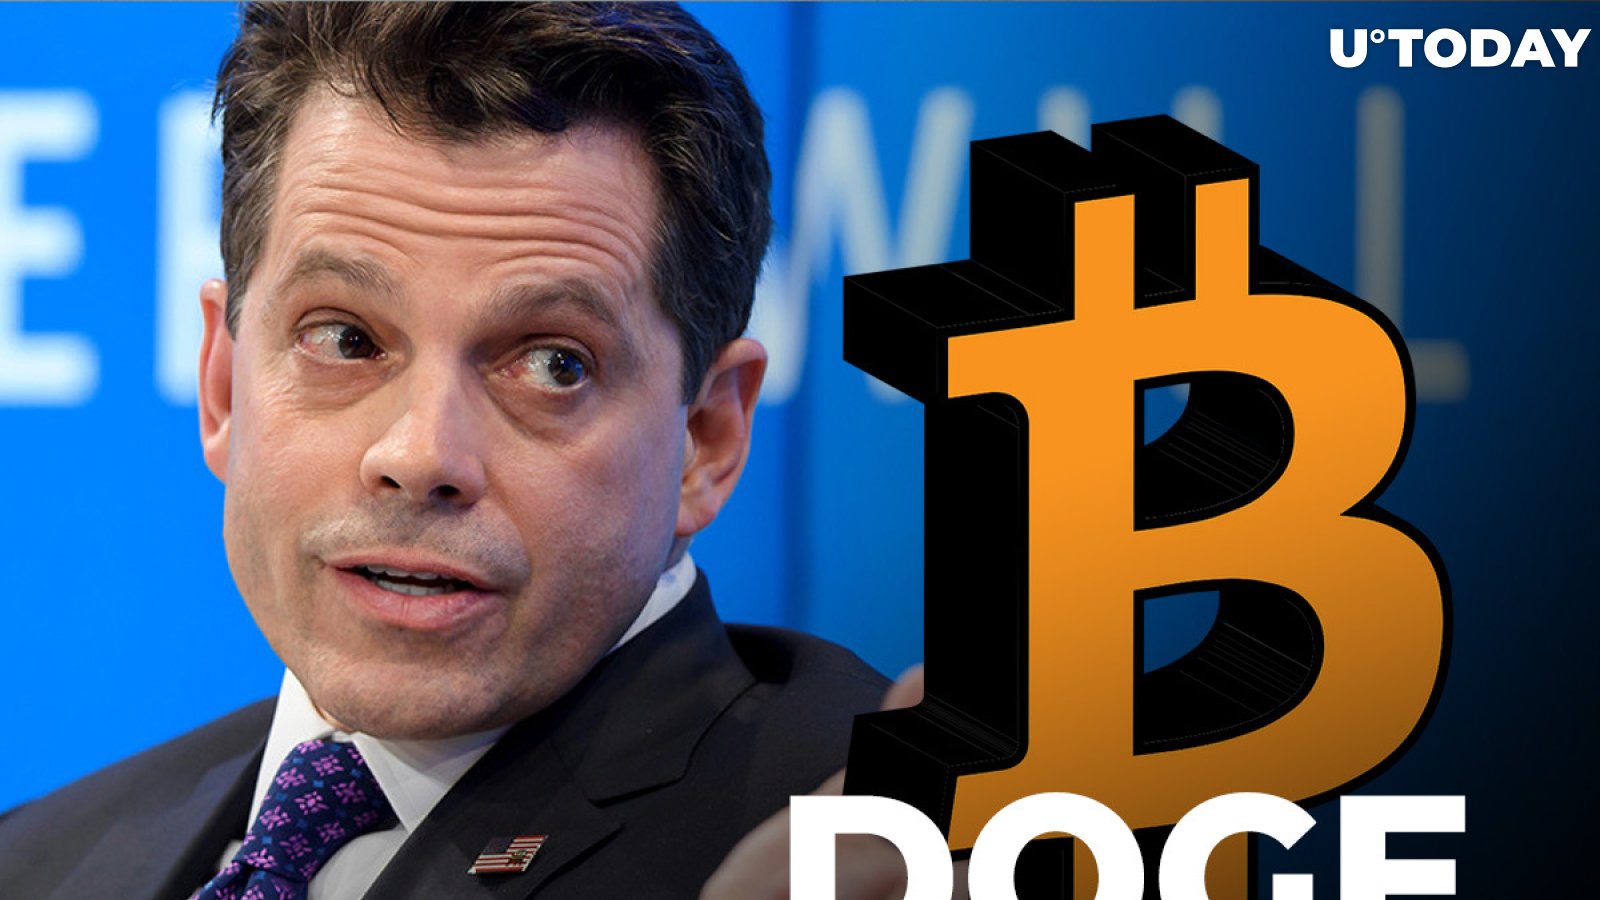 Bitcoin Is “Apex Predator” for Crypto, DOGE Might Be Digital Silver: Anthony Scaramucci 